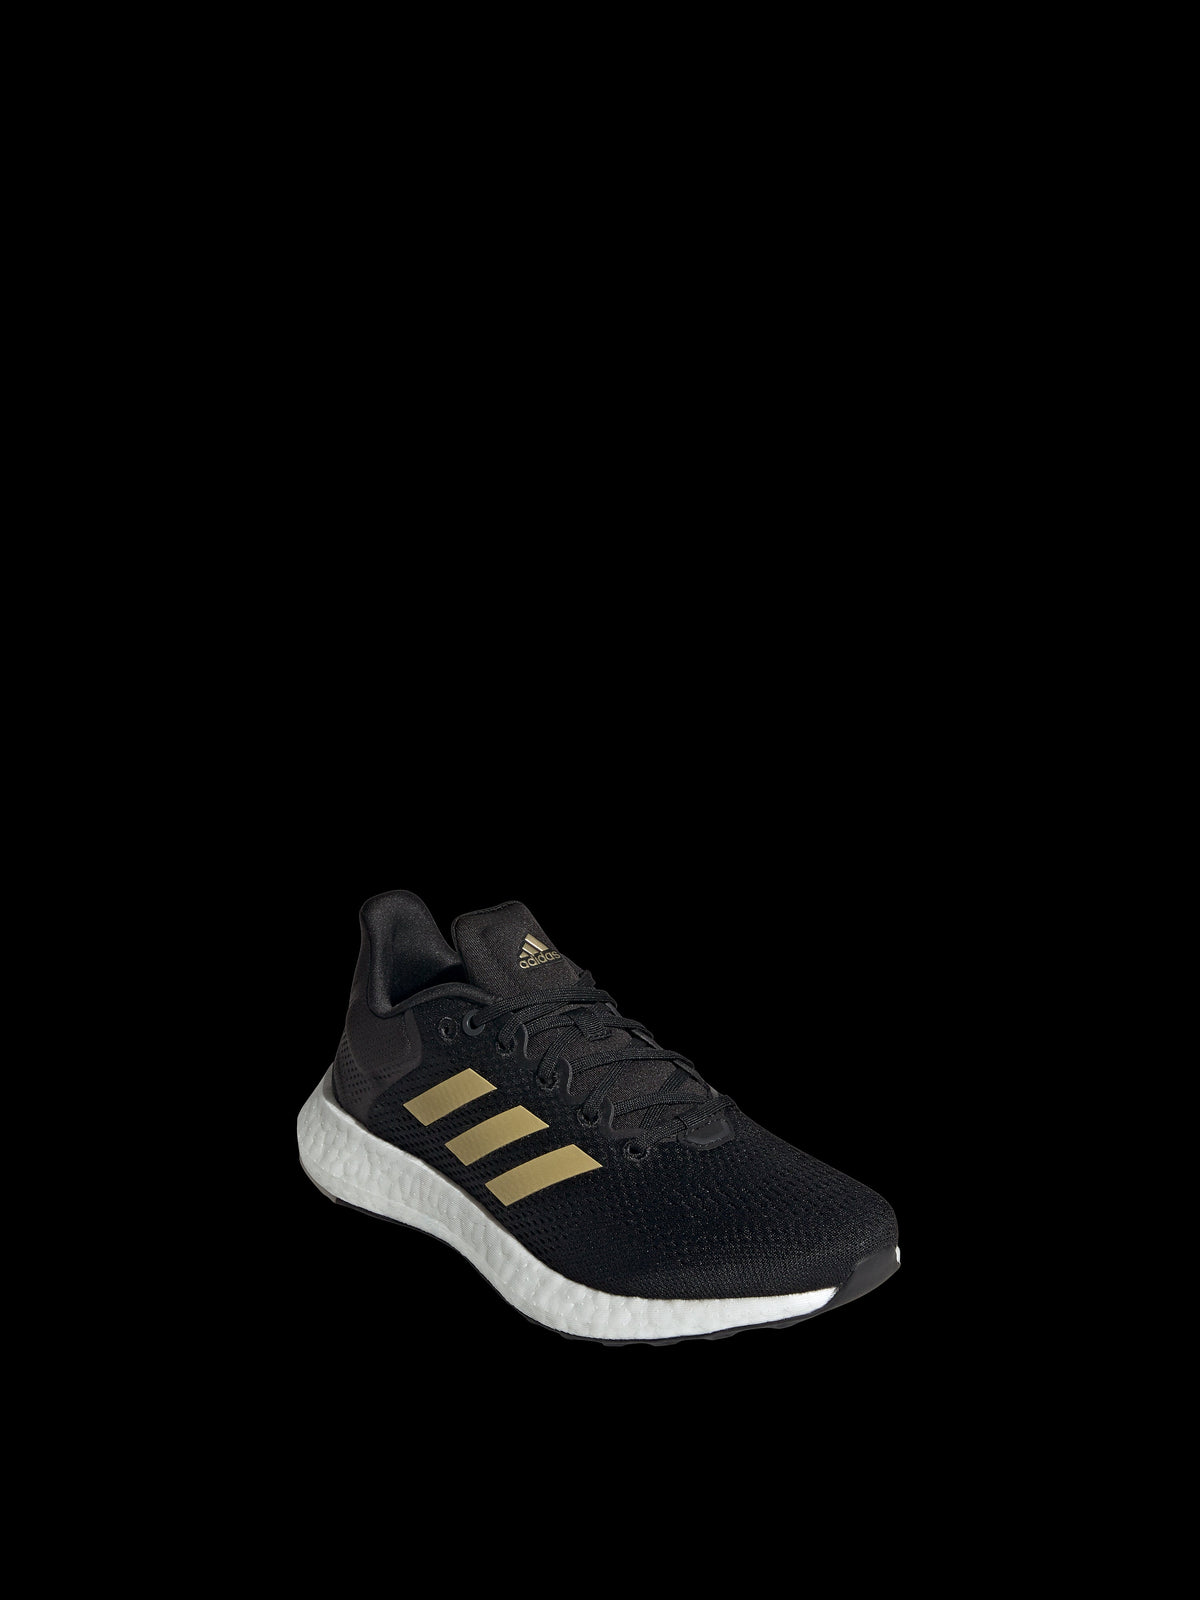 Womens Adidas Trainers in Black